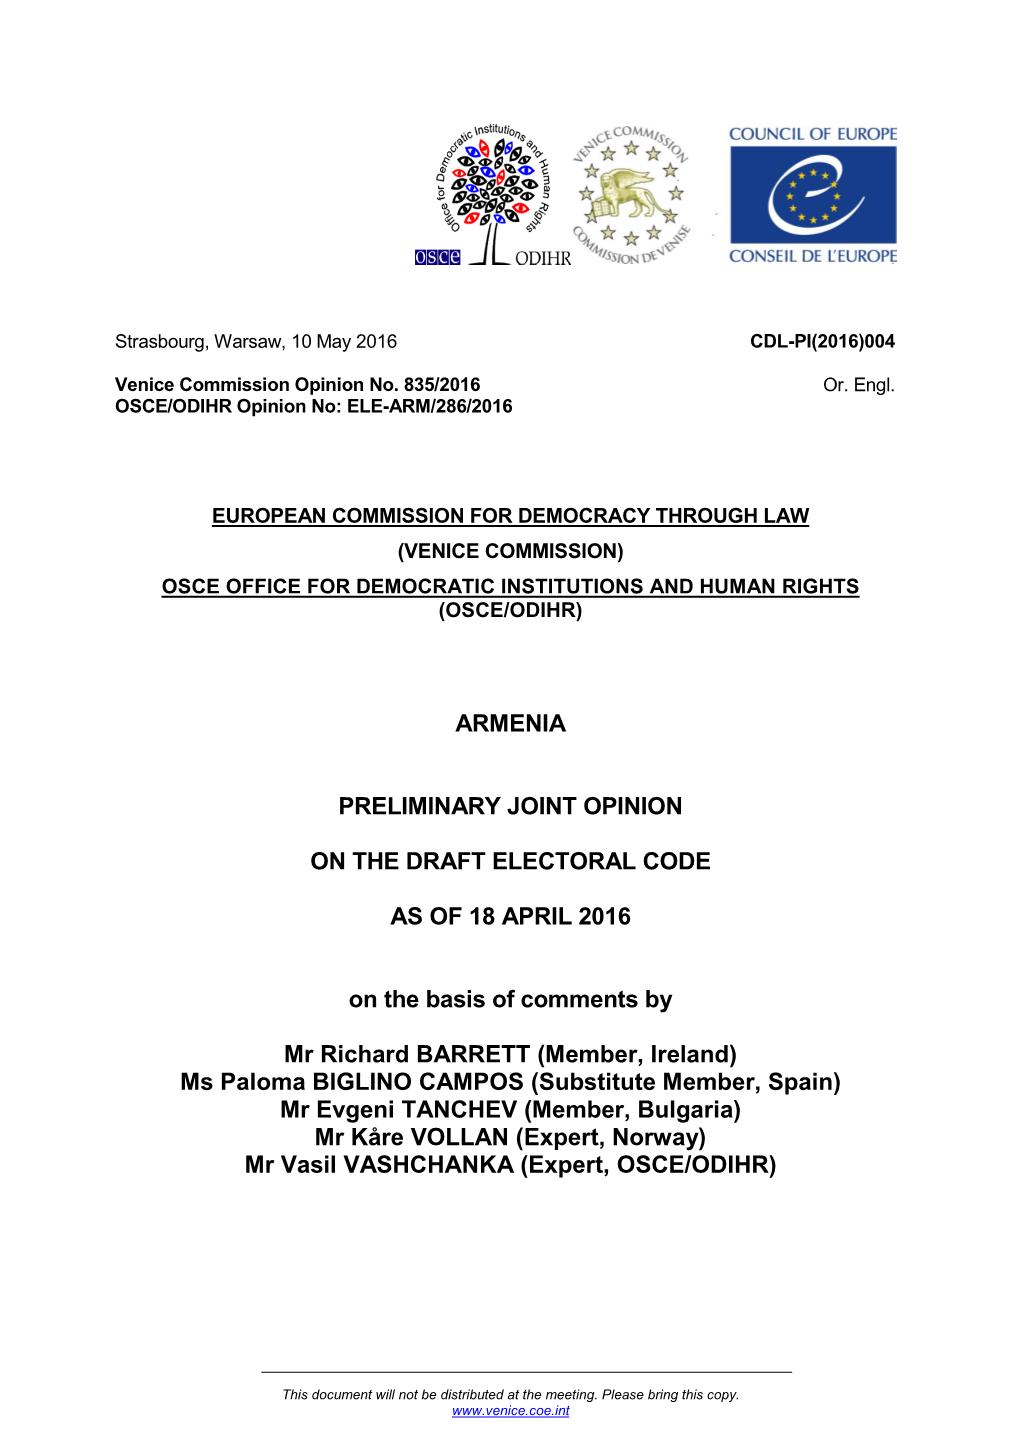 Preliminary Joint Opinion on the Draft Electoral Draft of Armenia